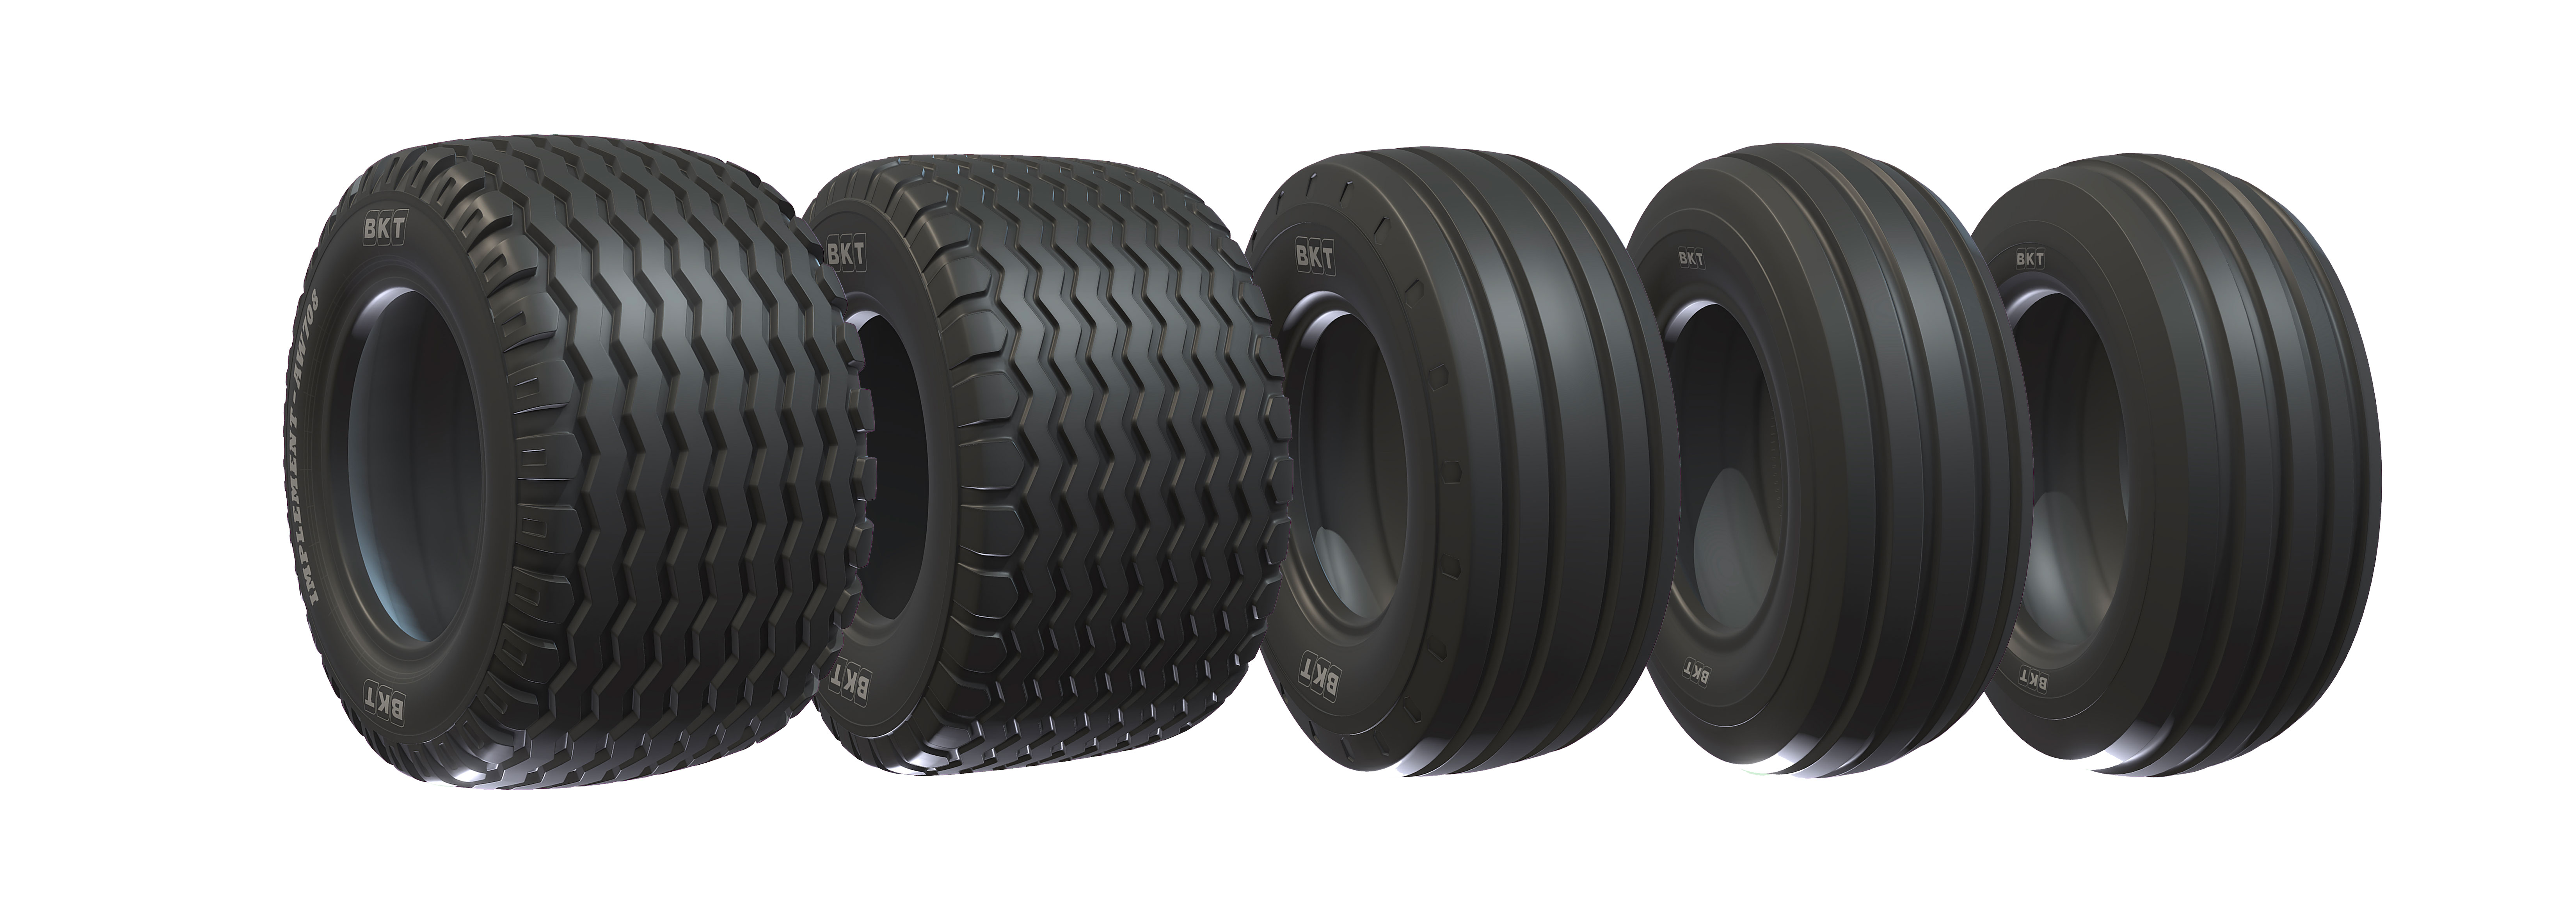 AGRICULTURAL EQUIPMENT RADIAL AND BIAS TIRES COMPARED